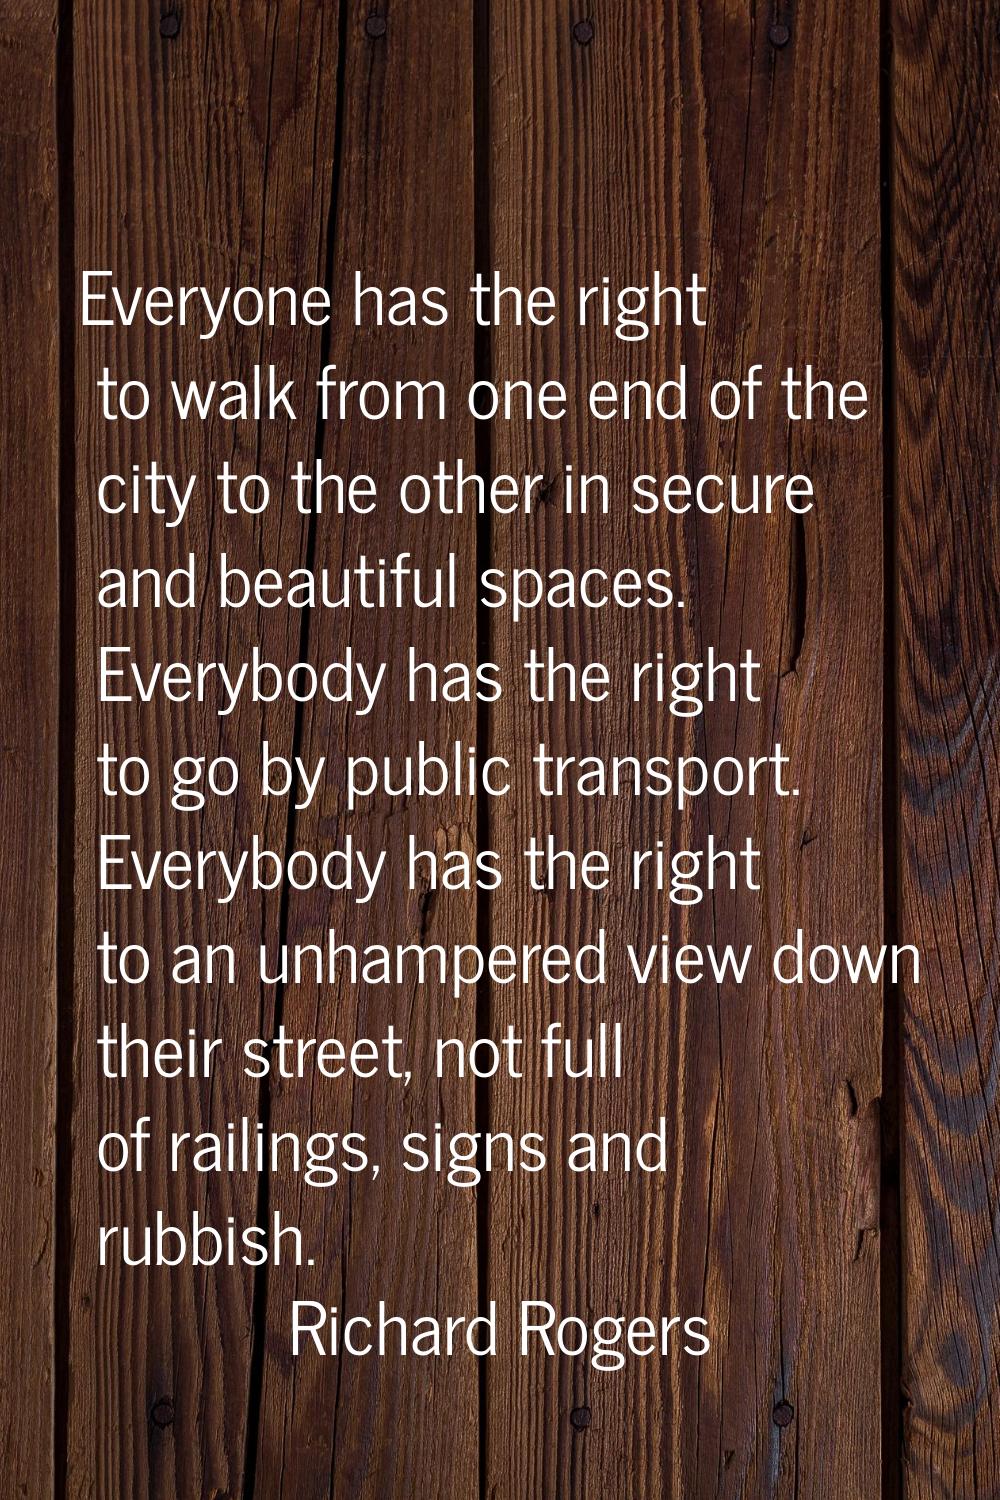 Everyone has the right to walk from one end of the city to the other in secure and beautiful spaces